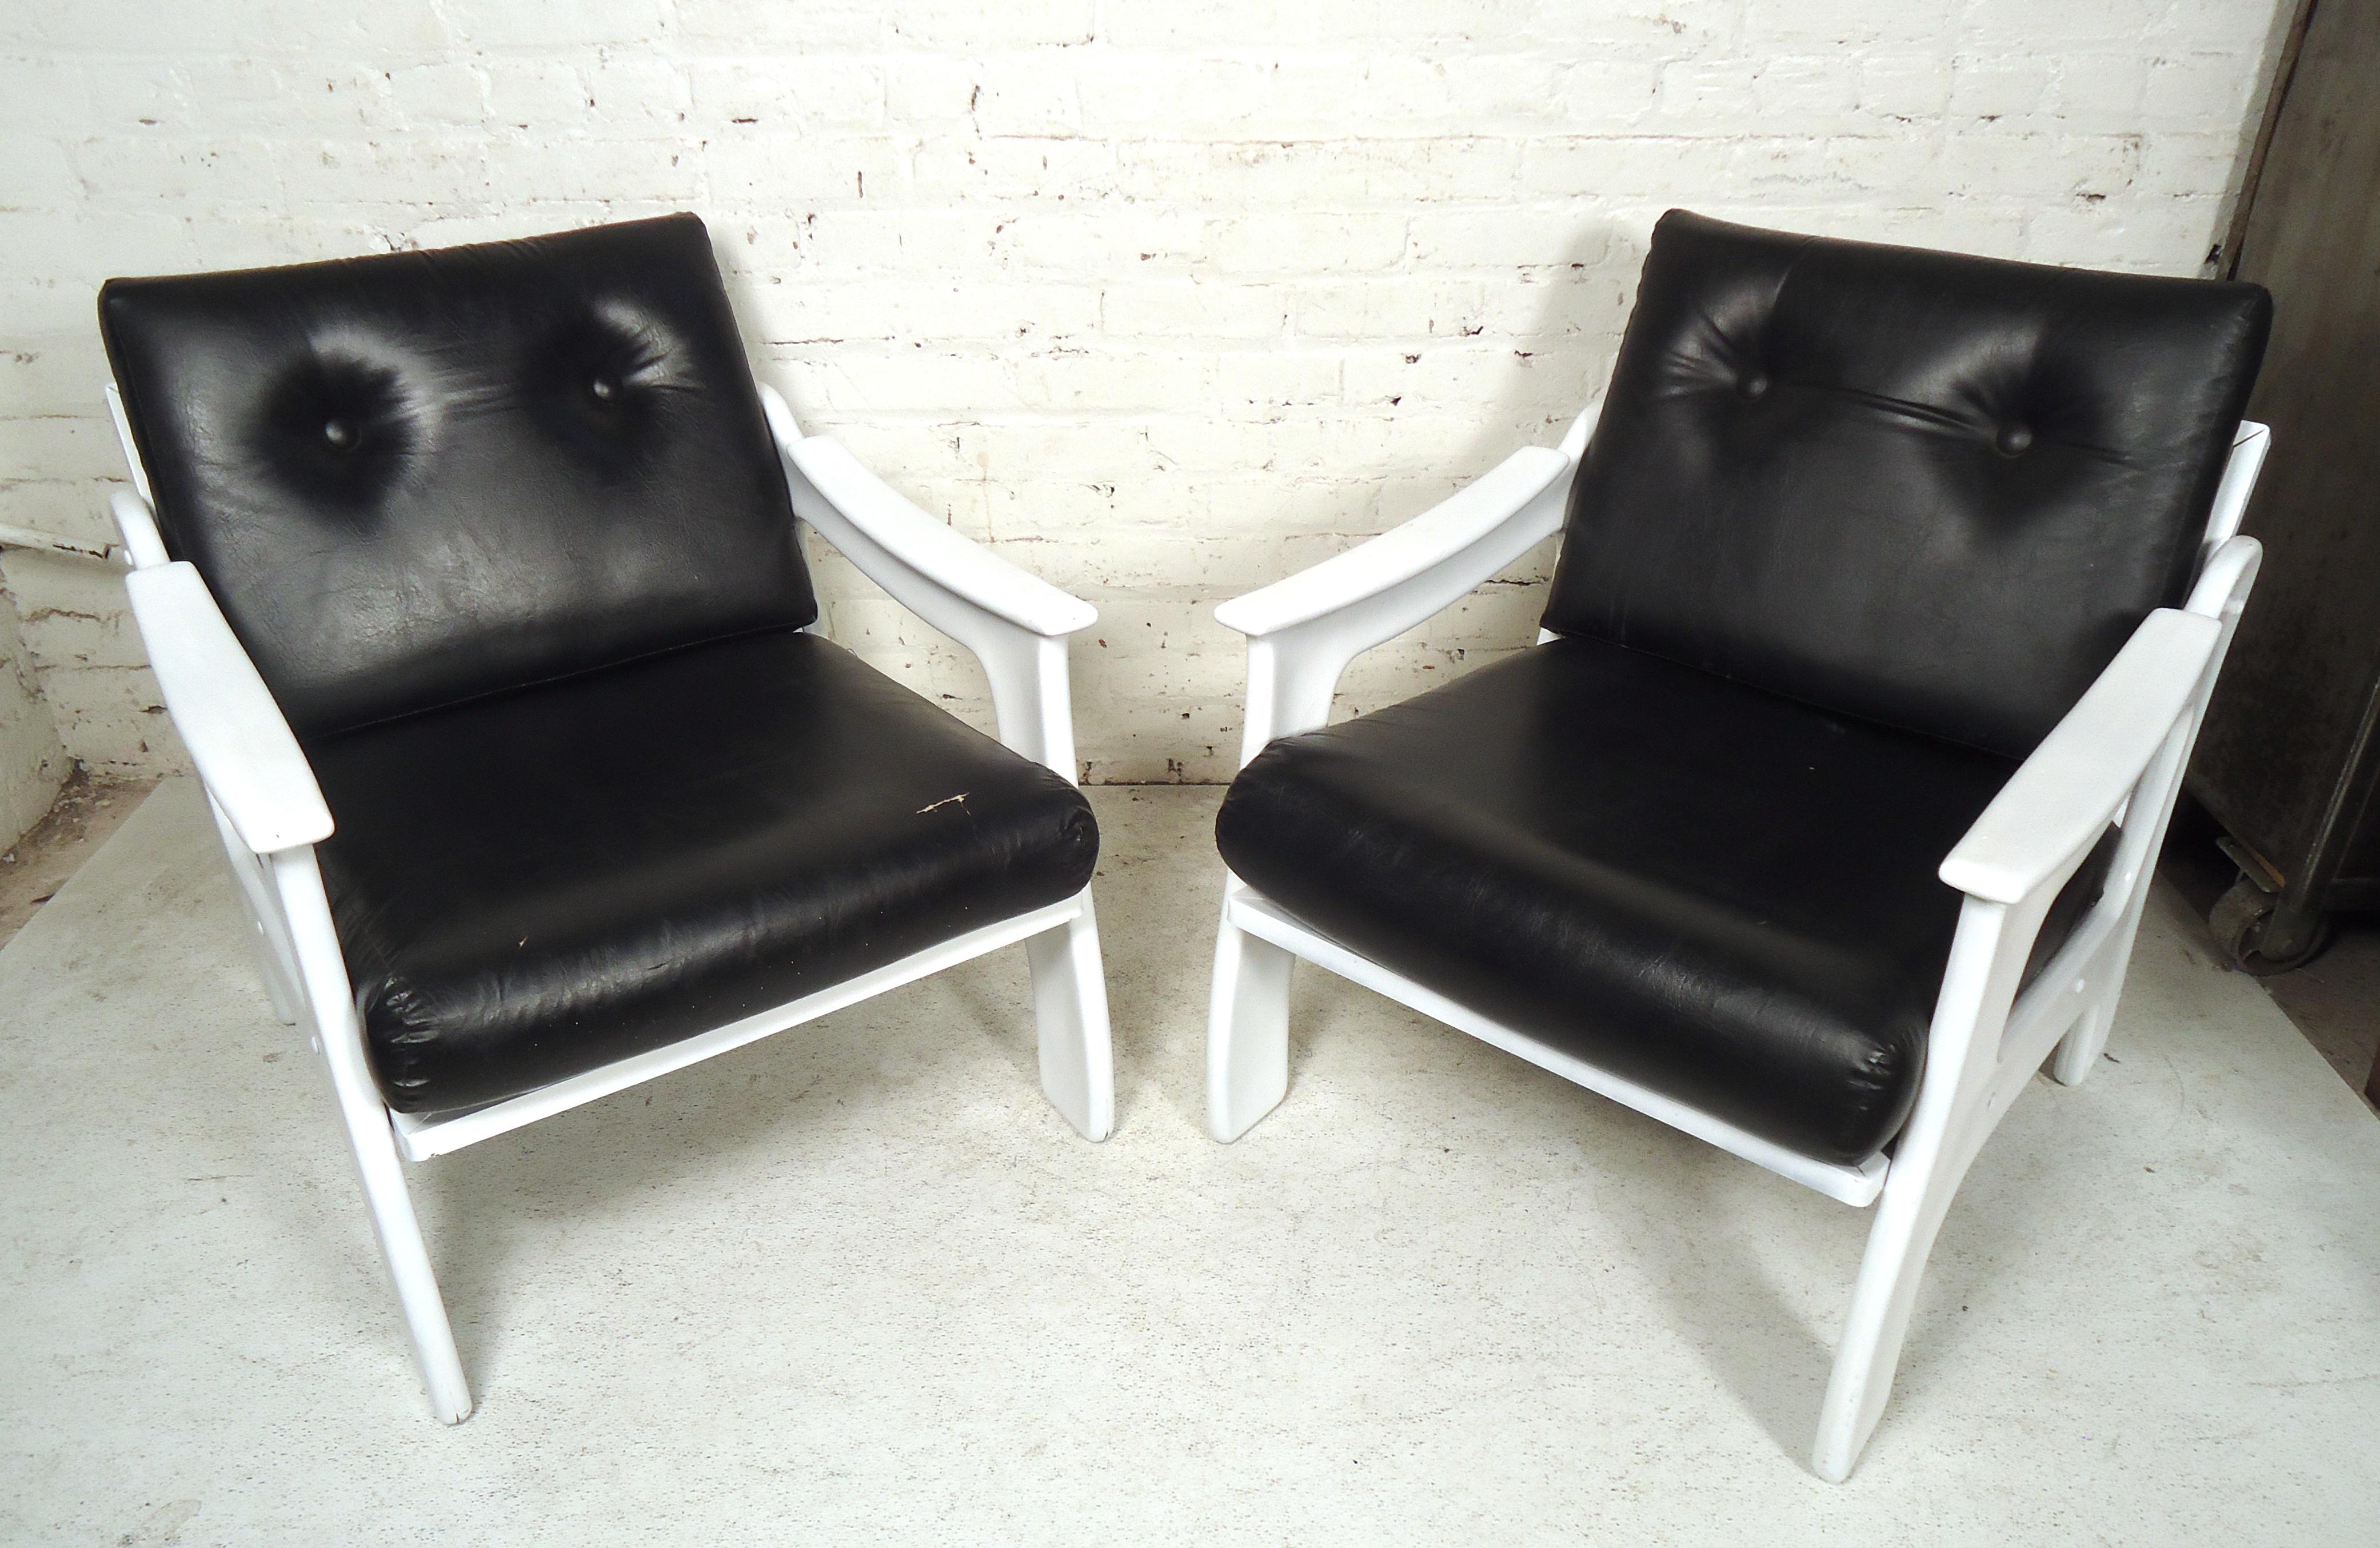 Great pair of white midcentury chairs by The Bunting Co. featured in vinyl cushions.
(Please confirm item location - NY or NJ - with dealer).